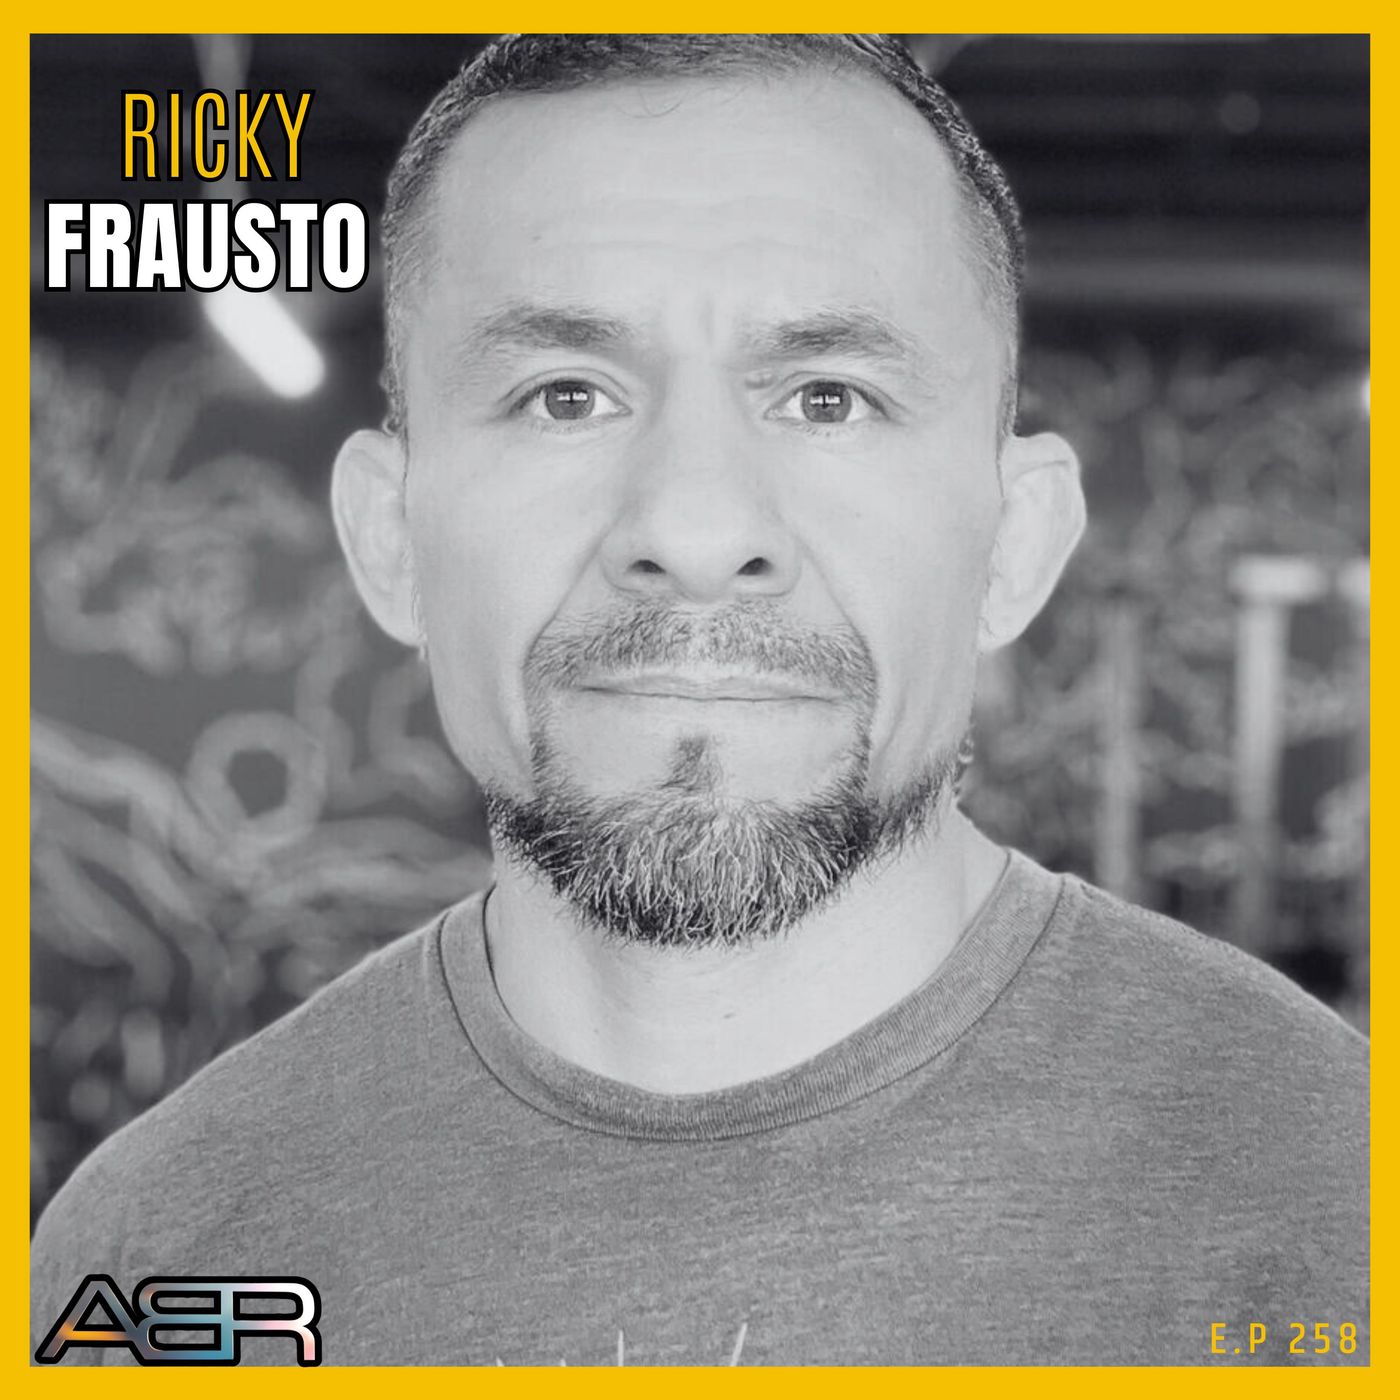 Airey Bro Radio / Ricky Frausto / Ep 258 / CrossFit / Fitness / Strength & Conditioning / Physical Culture / Community / NCAA Wrestling